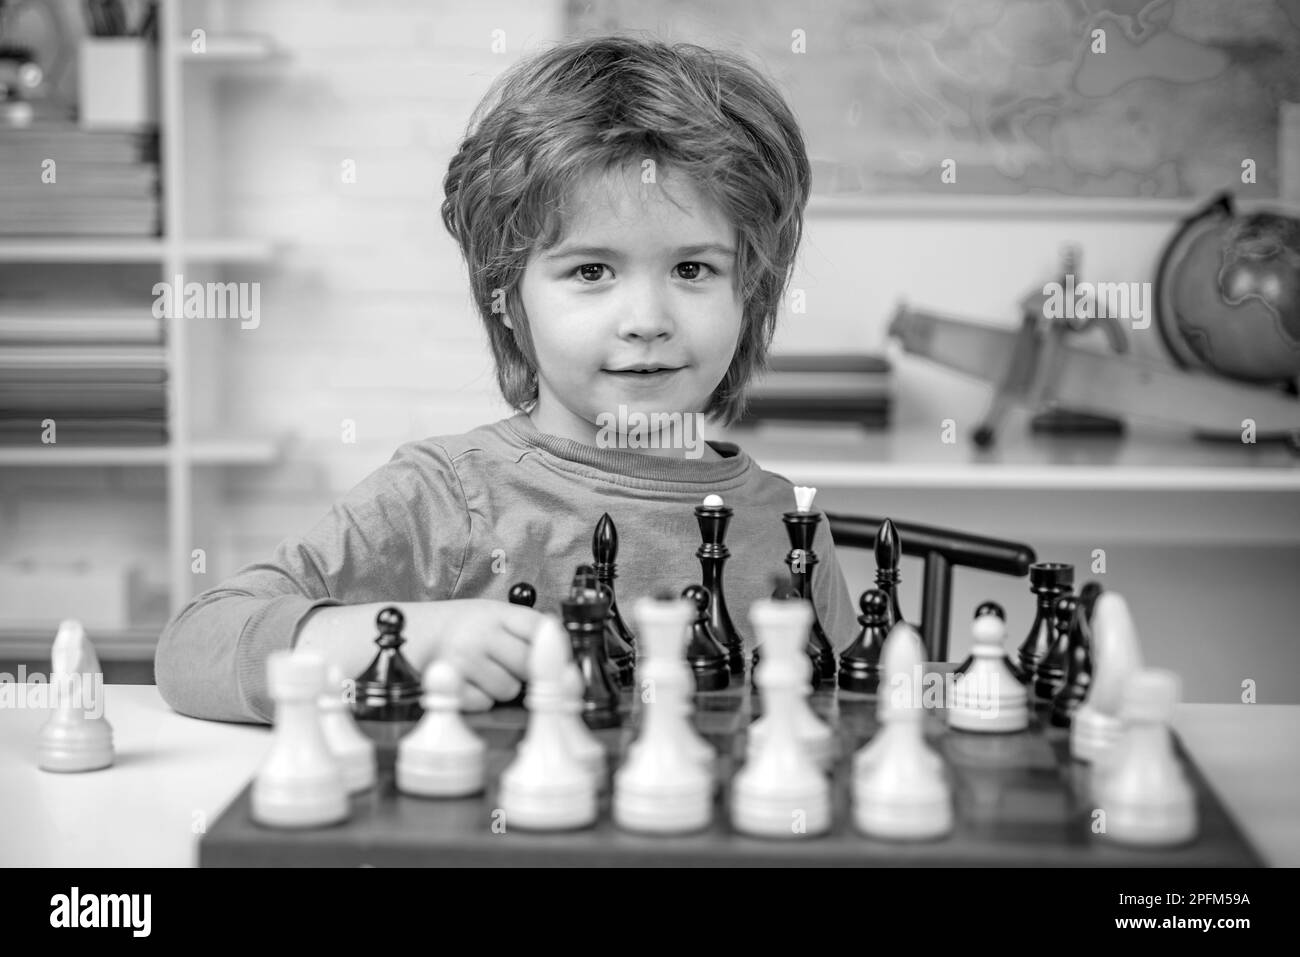 Chess strategy. Kid playing chess. Child and childhood. Clever concentrated and thinking child while playing chess. Stock Photo